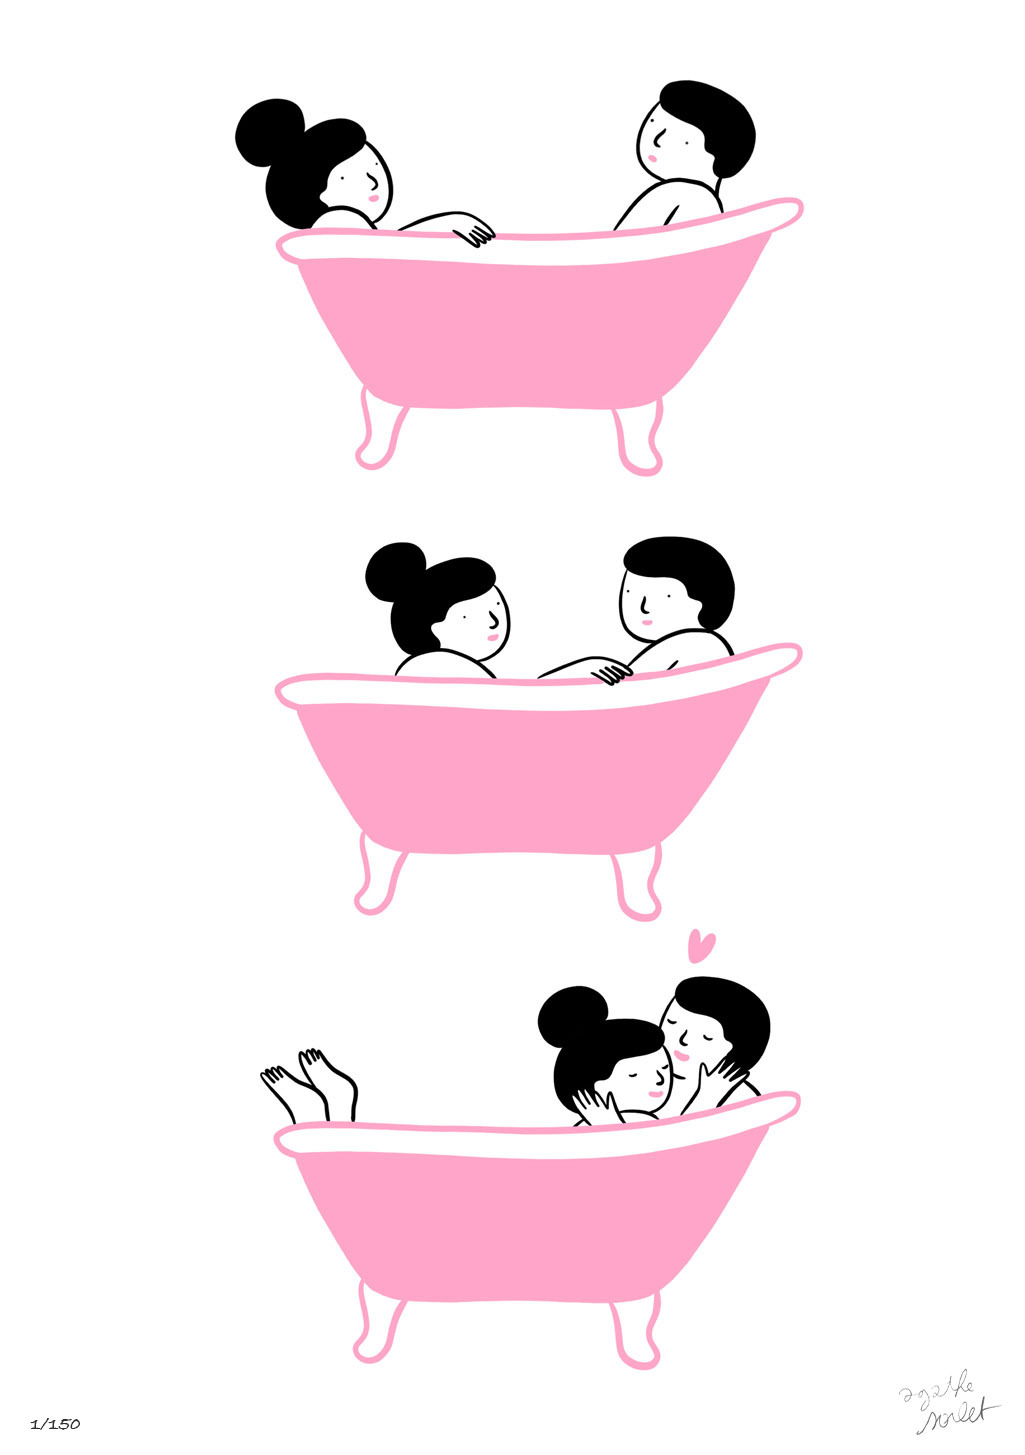 Baby Connection – Agathe Sorlet